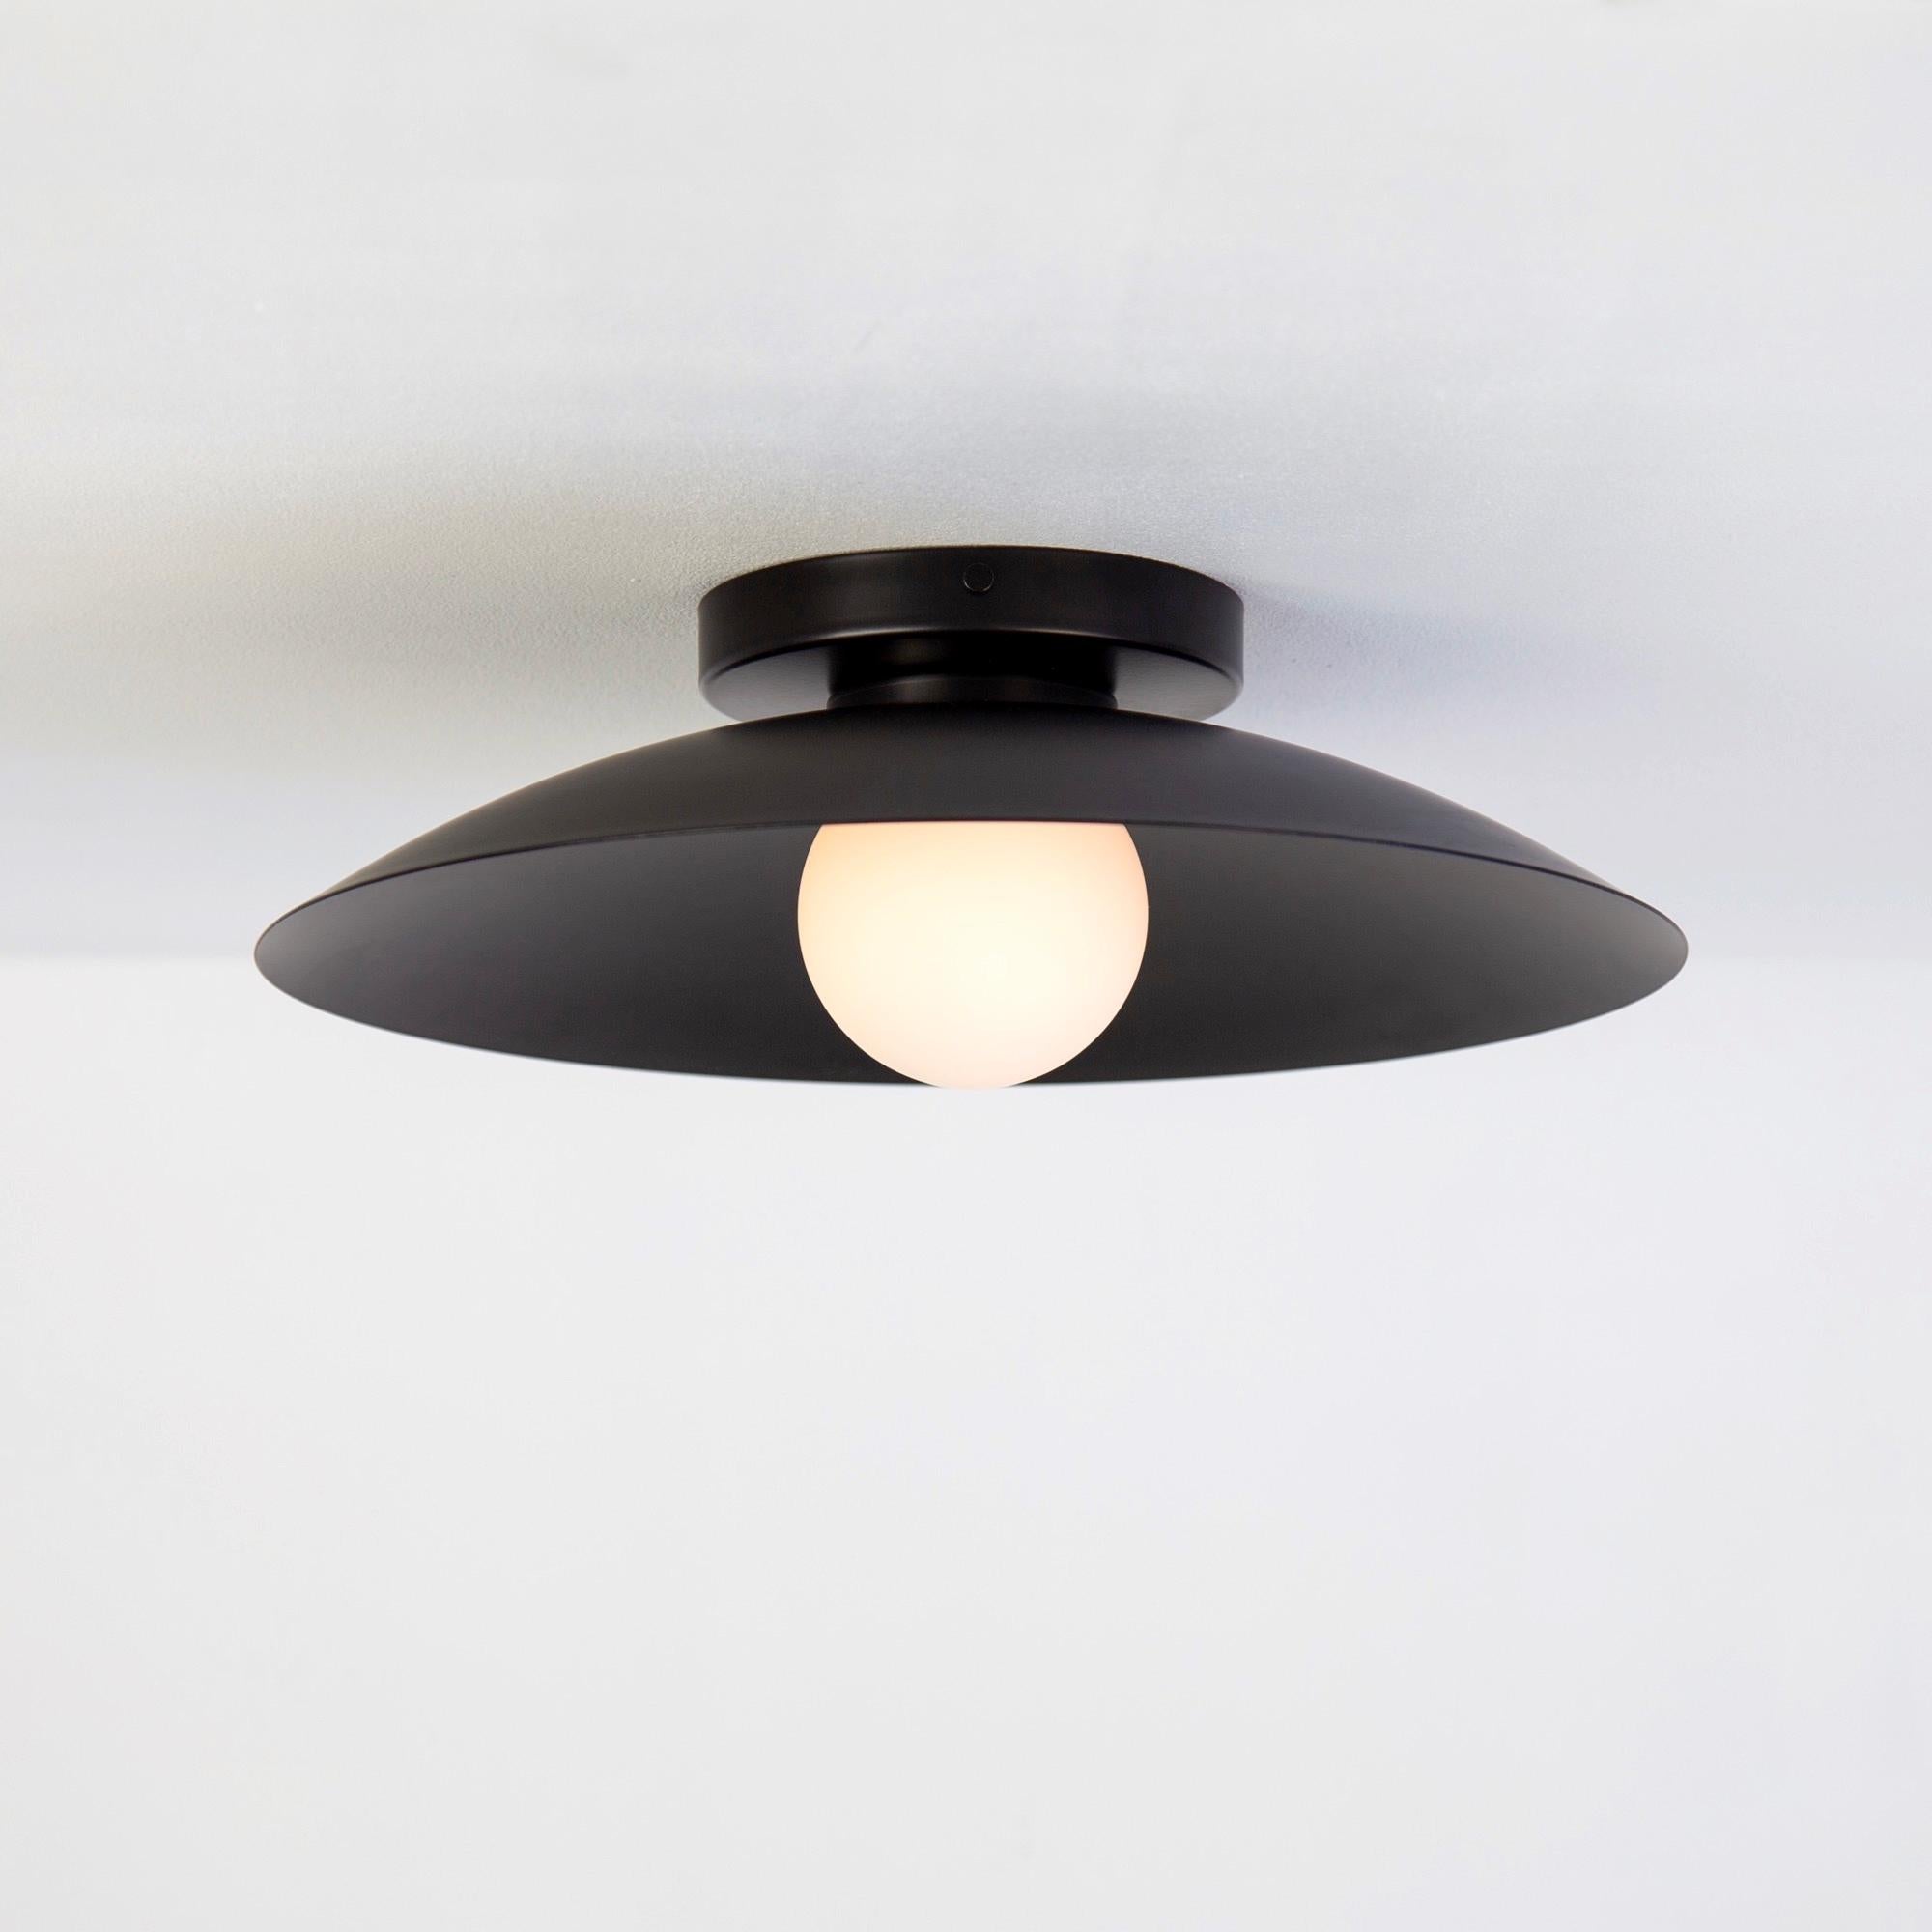 This listing is for 1x Dish Flush Mount in Black designed and manufactured by Research.Lighting.

Materials: Steel, Glass
Finish: Powder Coated Steel in black
Electronics: 1x G9 Socket, 4.5 Watt LED Bulb (included), 450 Lumens
UL Listed. Made in the